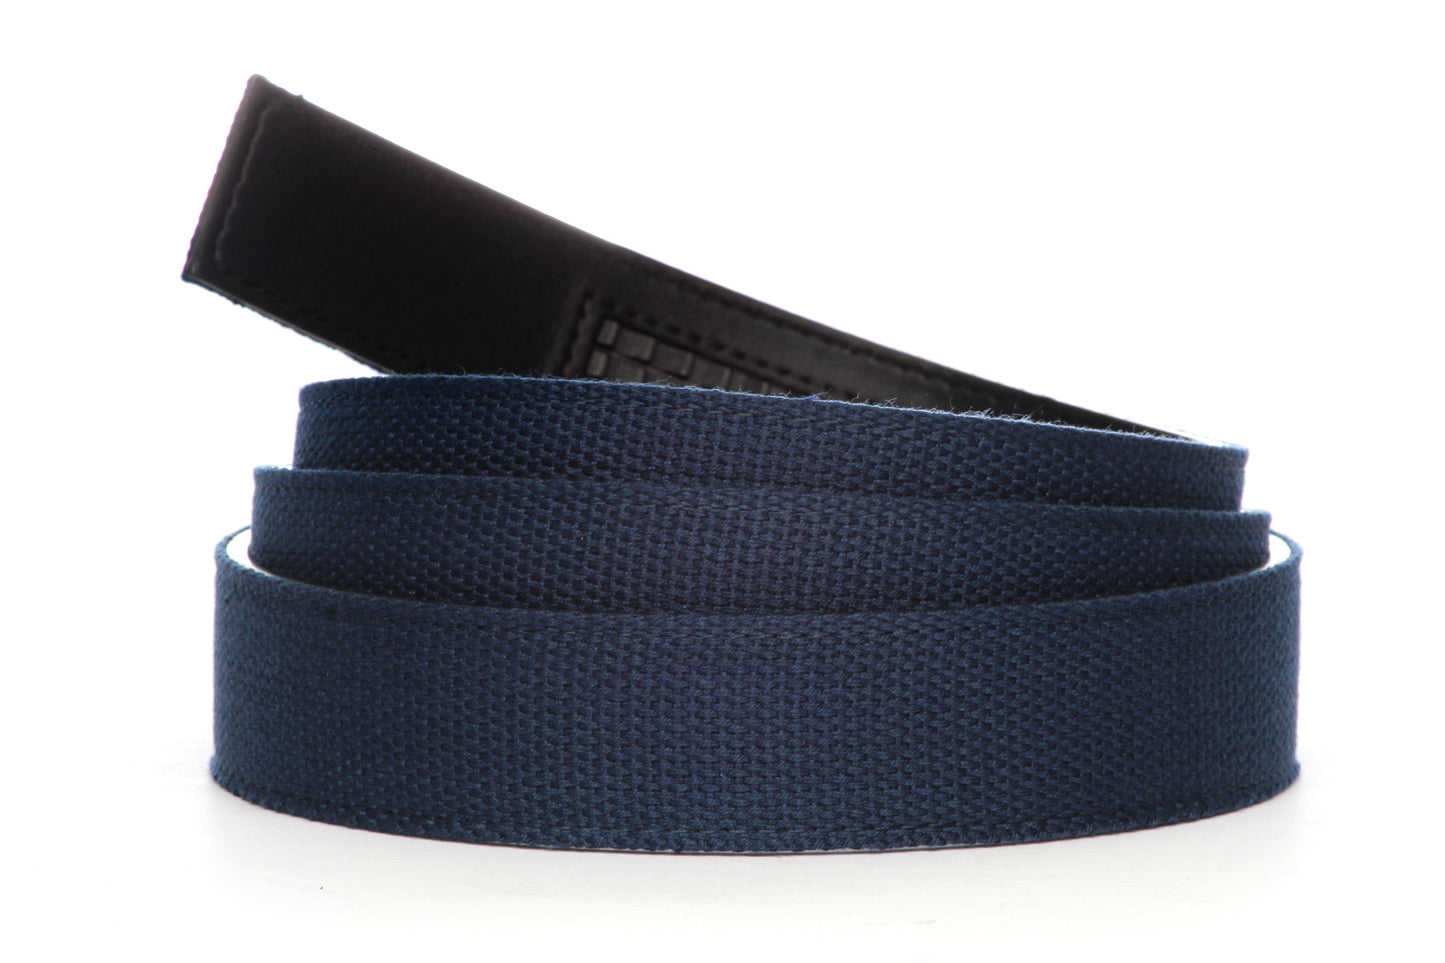 Men's canvas belt strap in navy with a 1.25-inch width, casual look, microfiber back